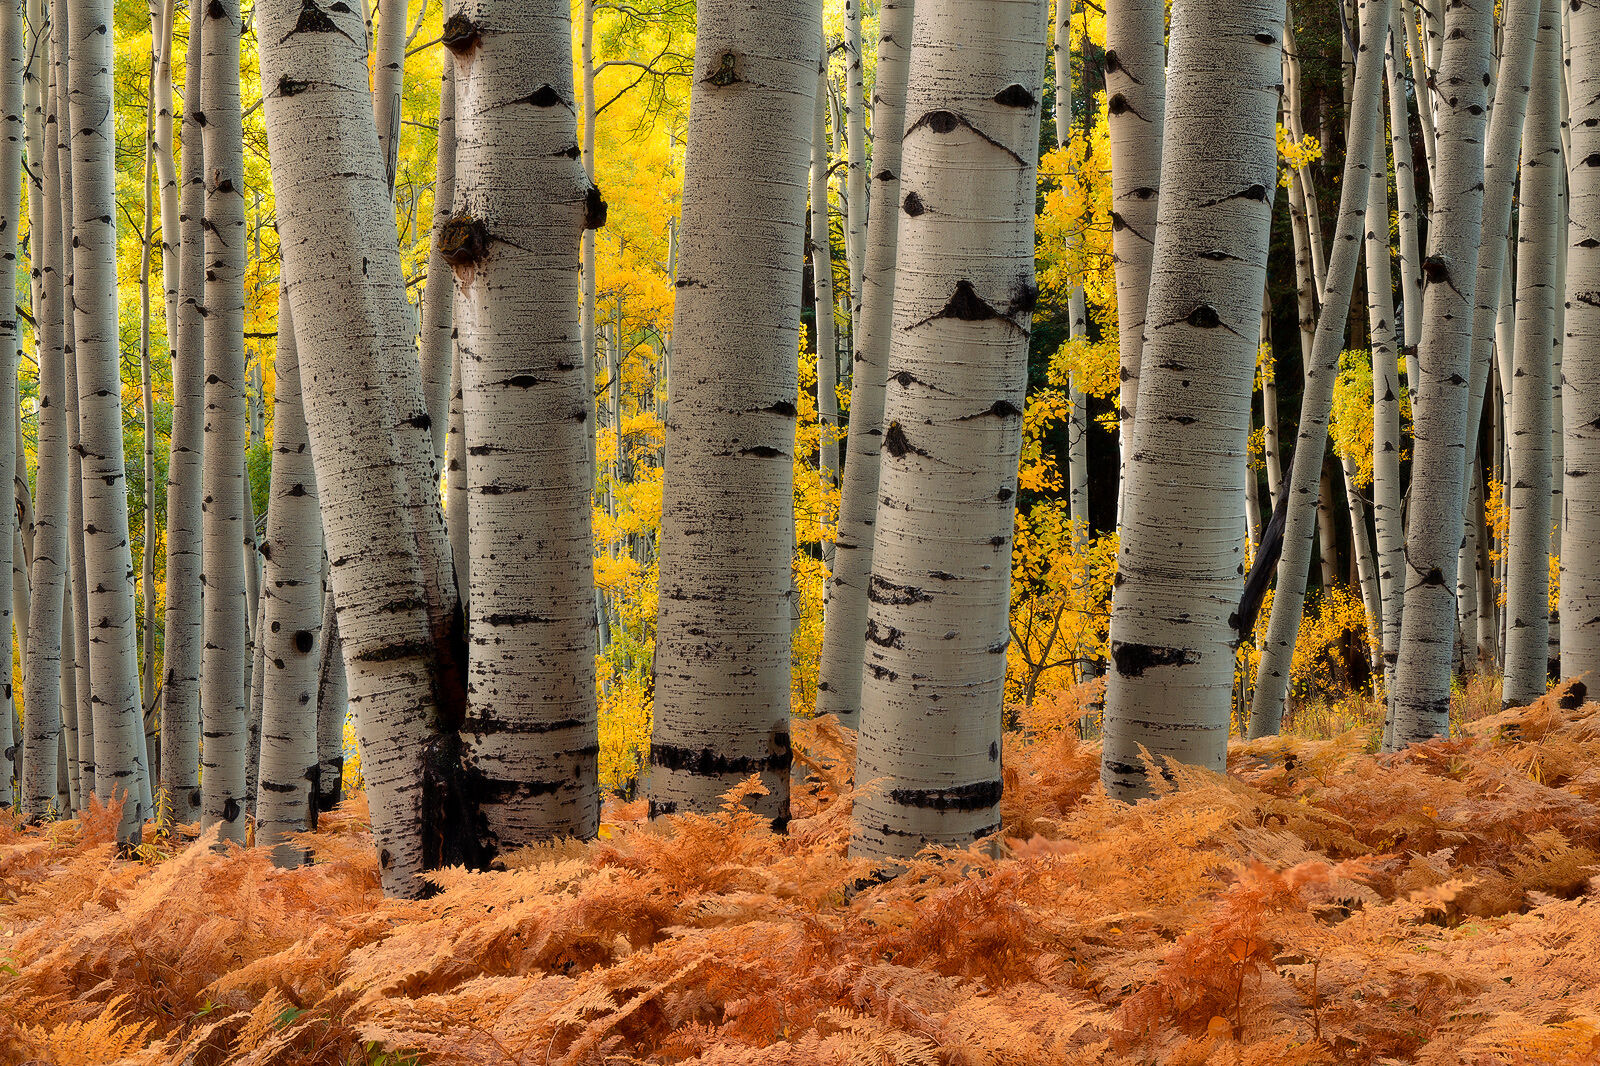 Red ferns cover the floor in the aspen forest with white aspen tree trunks seen up close and yellow-leaved branches in the background. 